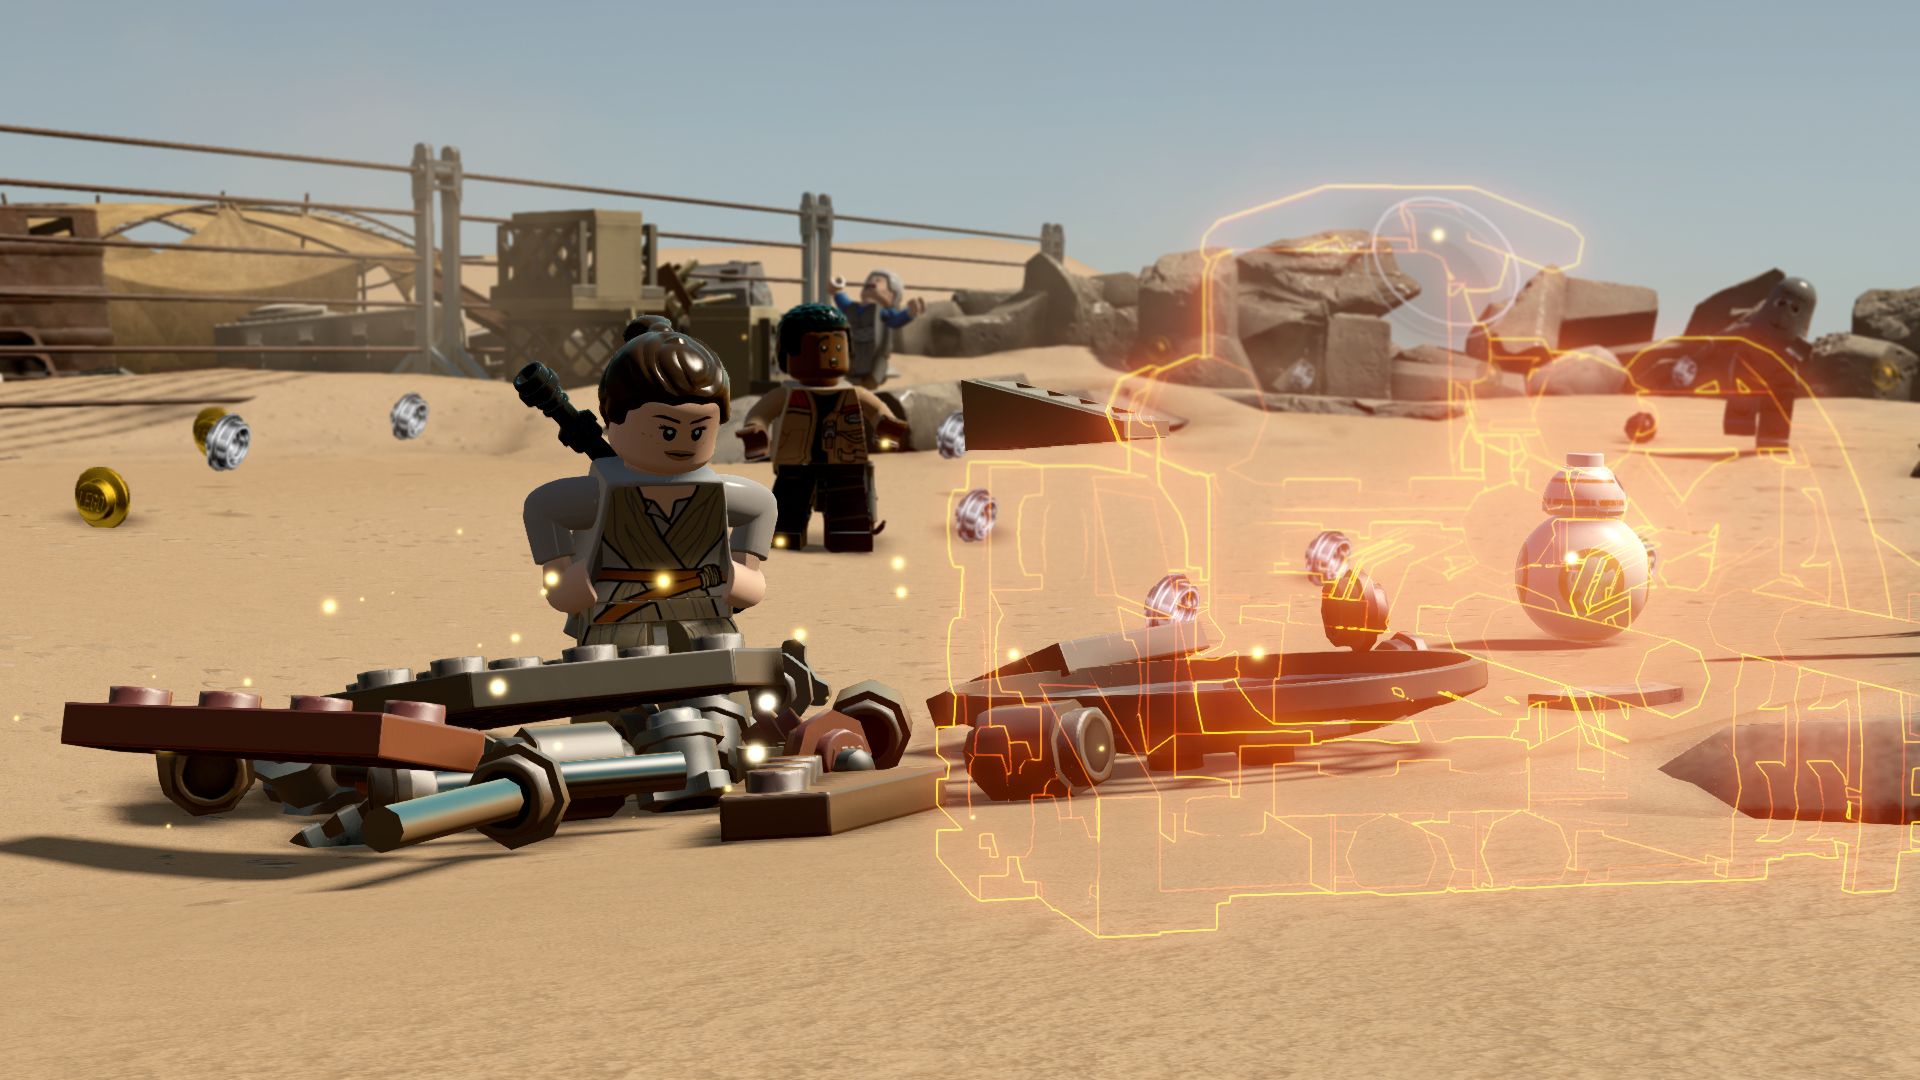 Video Game LEGO Star Wars The Force Awakens 1920x1080